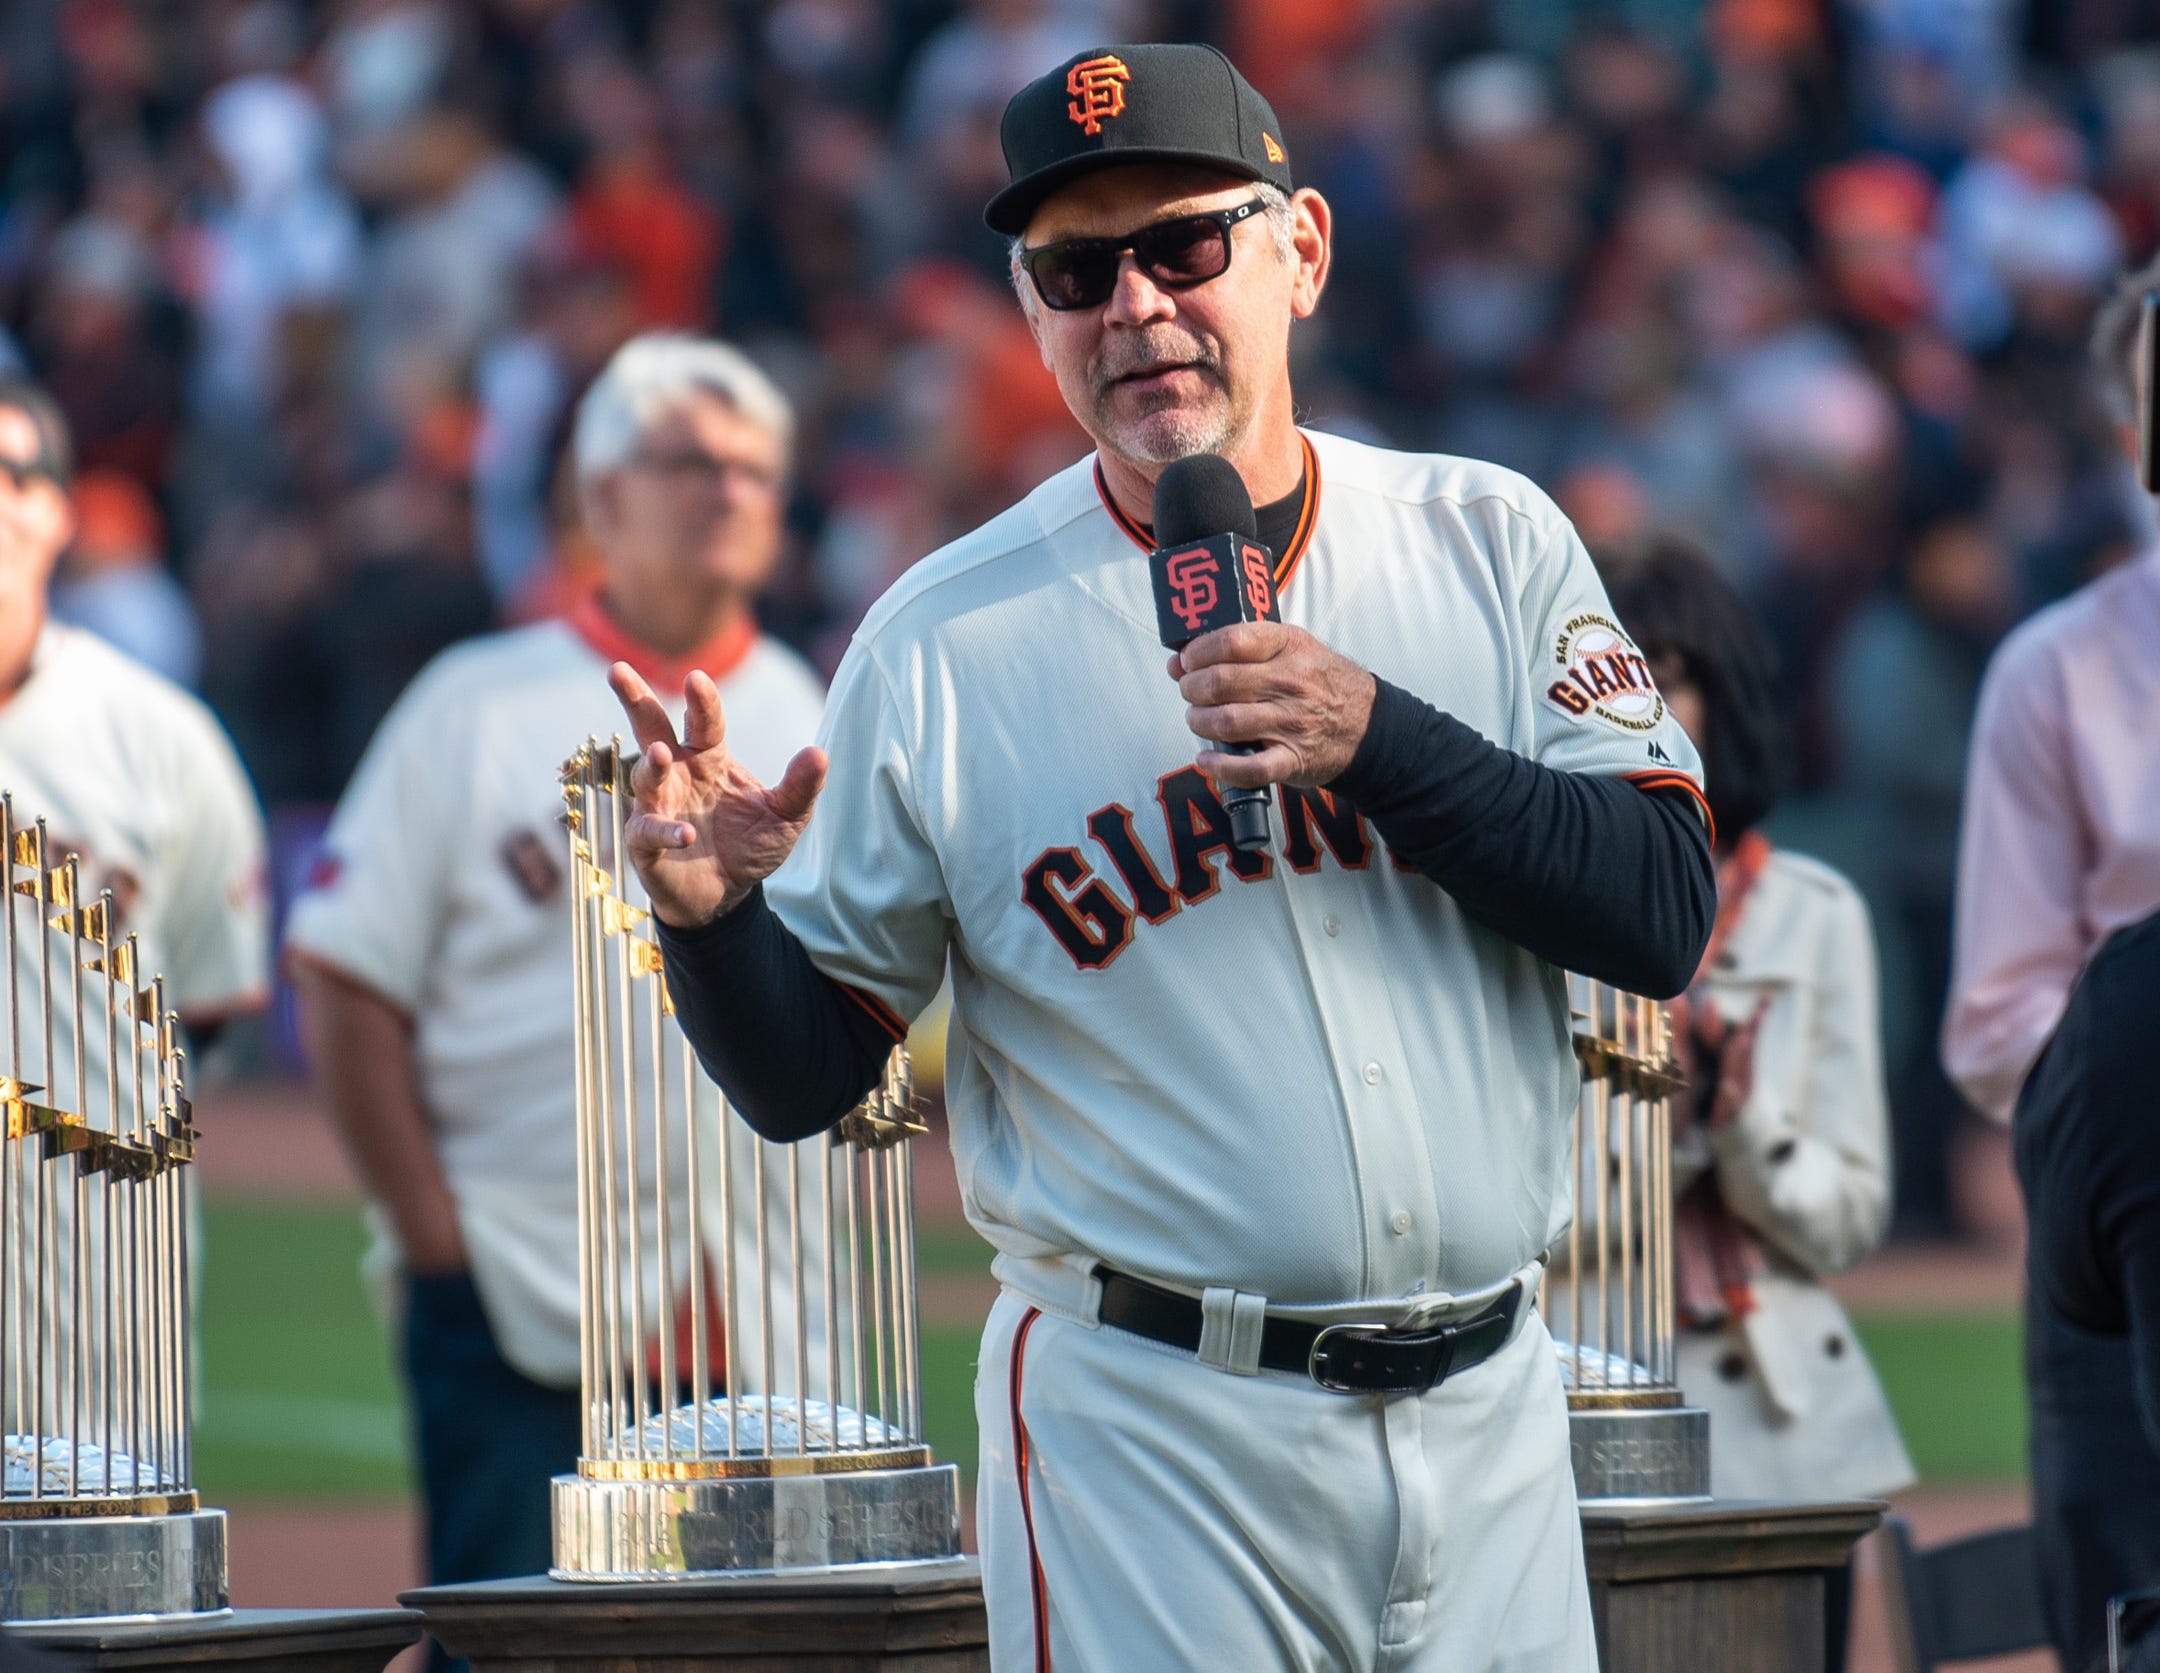 MLB on X: That's career win No. 2,041 for Bruce Bochy, now 10th